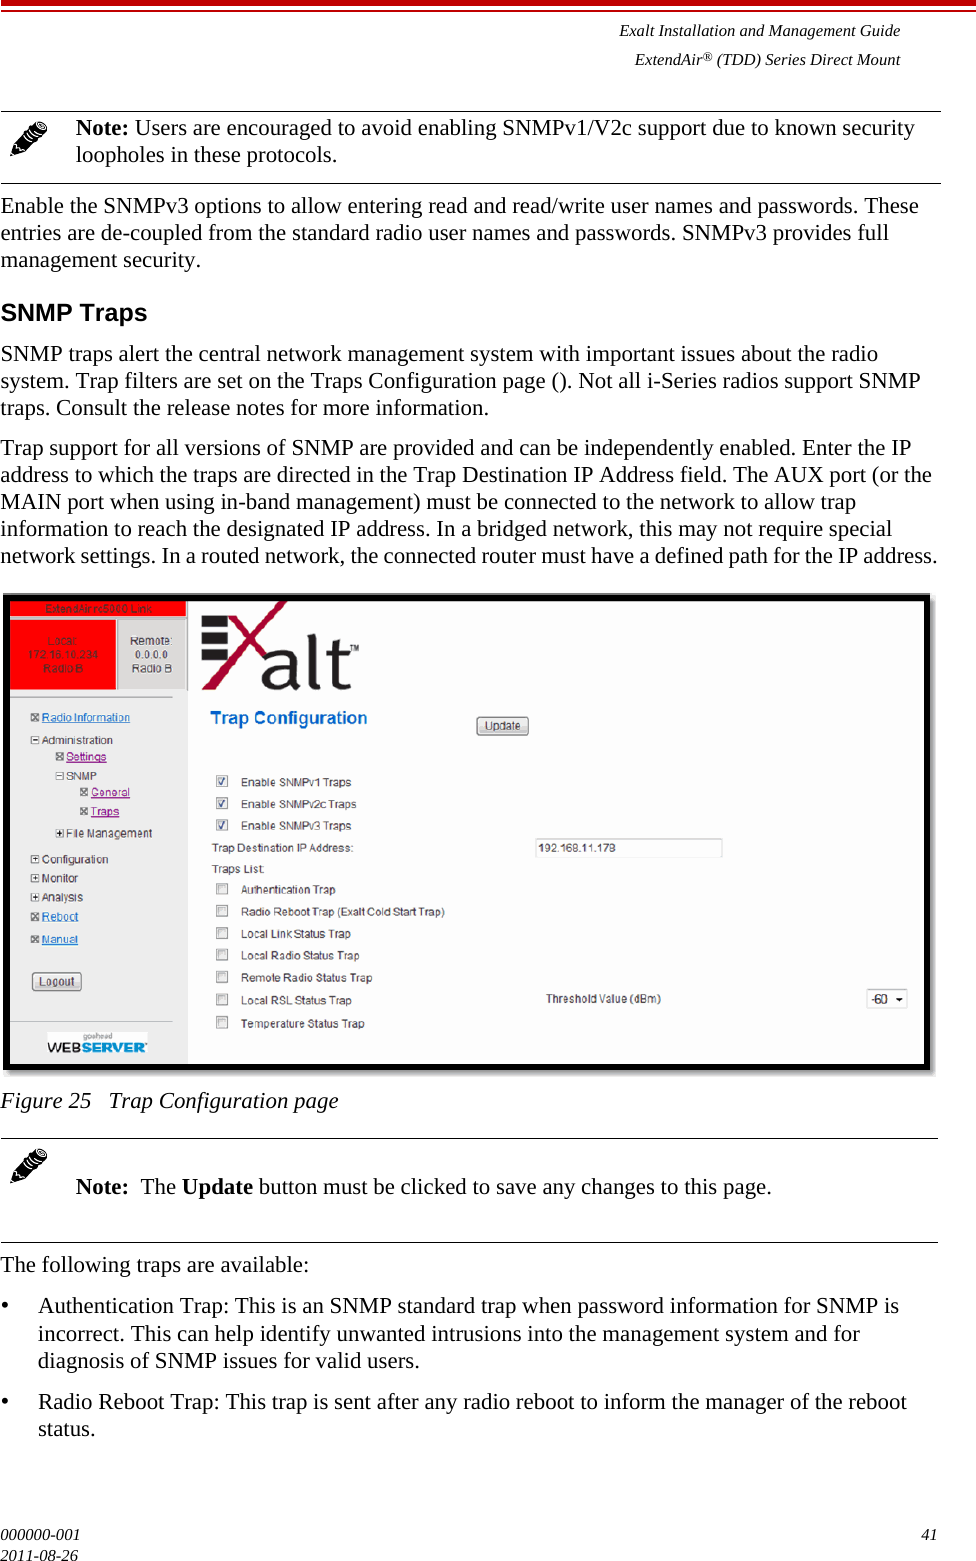 Exalt Installation and Management GuideExtendAir® (TDD) Series Direct Mount000000-001 412011-08-26Enable the SNMPv3 options to allow entering read and read/write user names and passwords. These entries are de-coupled from the standard radio user names and passwords. SNMPv3 provides full management security.SNMP TrapsSNMP traps alert the central network management system with important issues about the radio system. Trap filters are set on the Traps Configuration page (). Not all i-Series radios support SNMP traps. Consult the release notes for more information. Trap support for all versions of SNMP are provided and can be independently enabled. Enter the IP address to which the traps are directed in the Trap Destination IP Address field. The AUX port (or the MAIN port when using in-band management) must be connected to the network to allow trap information to reach the designated IP address. In a bridged network, this may not require special network settings. In a routed network, the connected router must have a defined path for the IP address.Figure 25   Trap Configuration pageThe following traps are available:•Authentication Trap: This is an SNMP standard trap when password information for SNMP is incorrect. This can help identify unwanted intrusions into the management system and for diagnosis of SNMP issues for valid users.•Radio Reboot Trap: This trap is sent after any radio reboot to inform the manager of the reboot status.Note: Users are encouraged to avoid enabling SNMPv1/V2c support due to known security loopholes in these protocols.Note:  The Update button must be clicked to save any changes to this page.